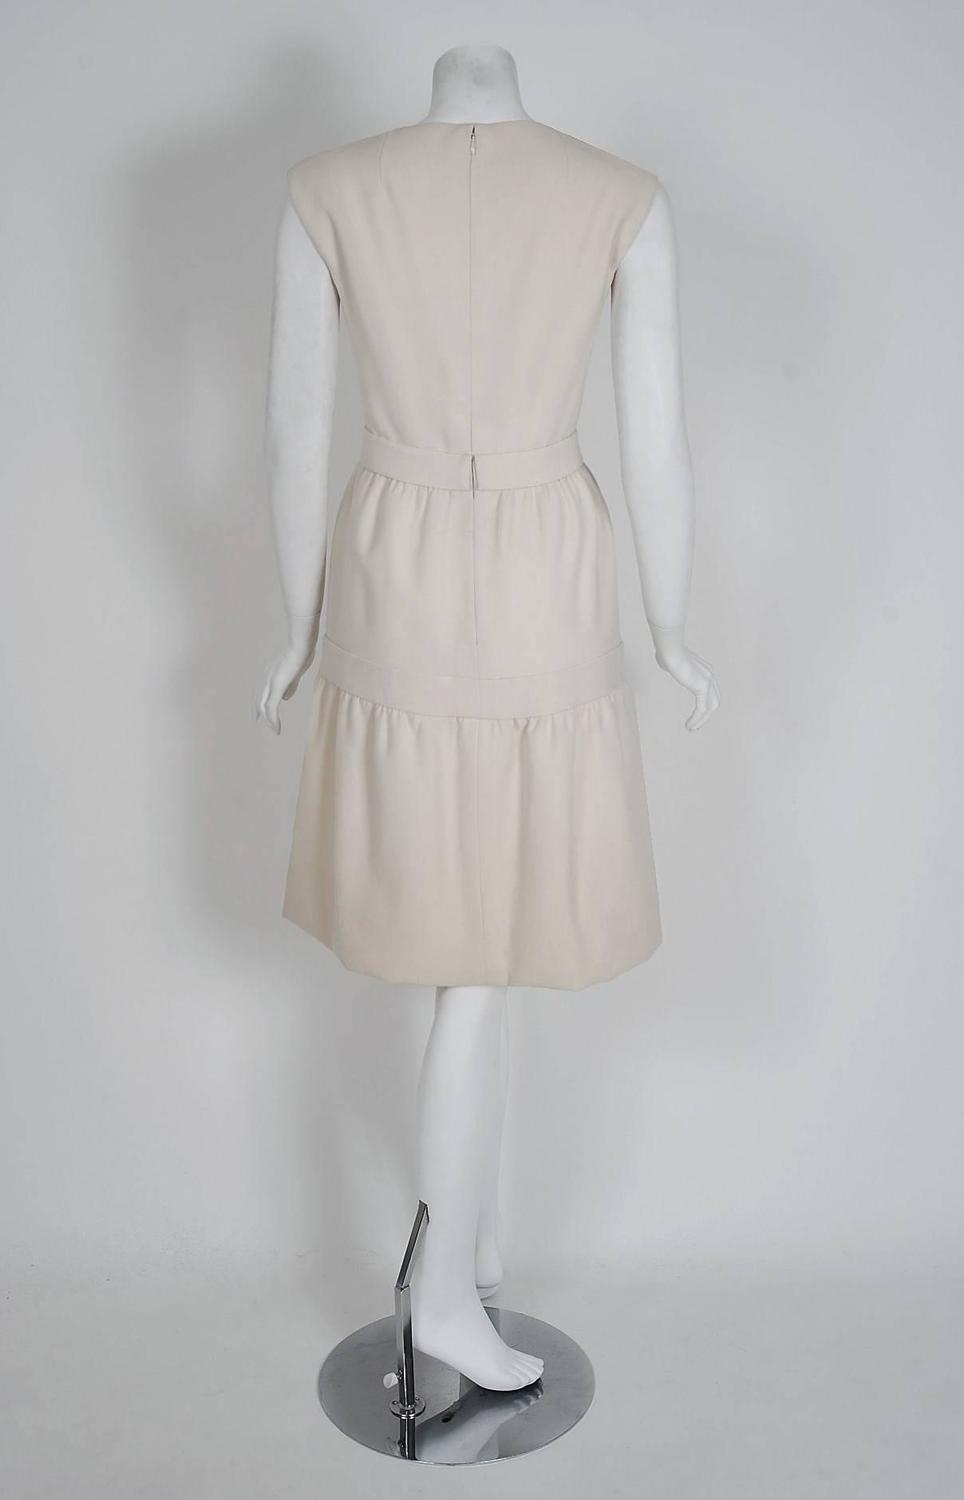 1965 Pierre Cardin Ivory-White Tailored Wool Mod Space-Age Belted Dress ...